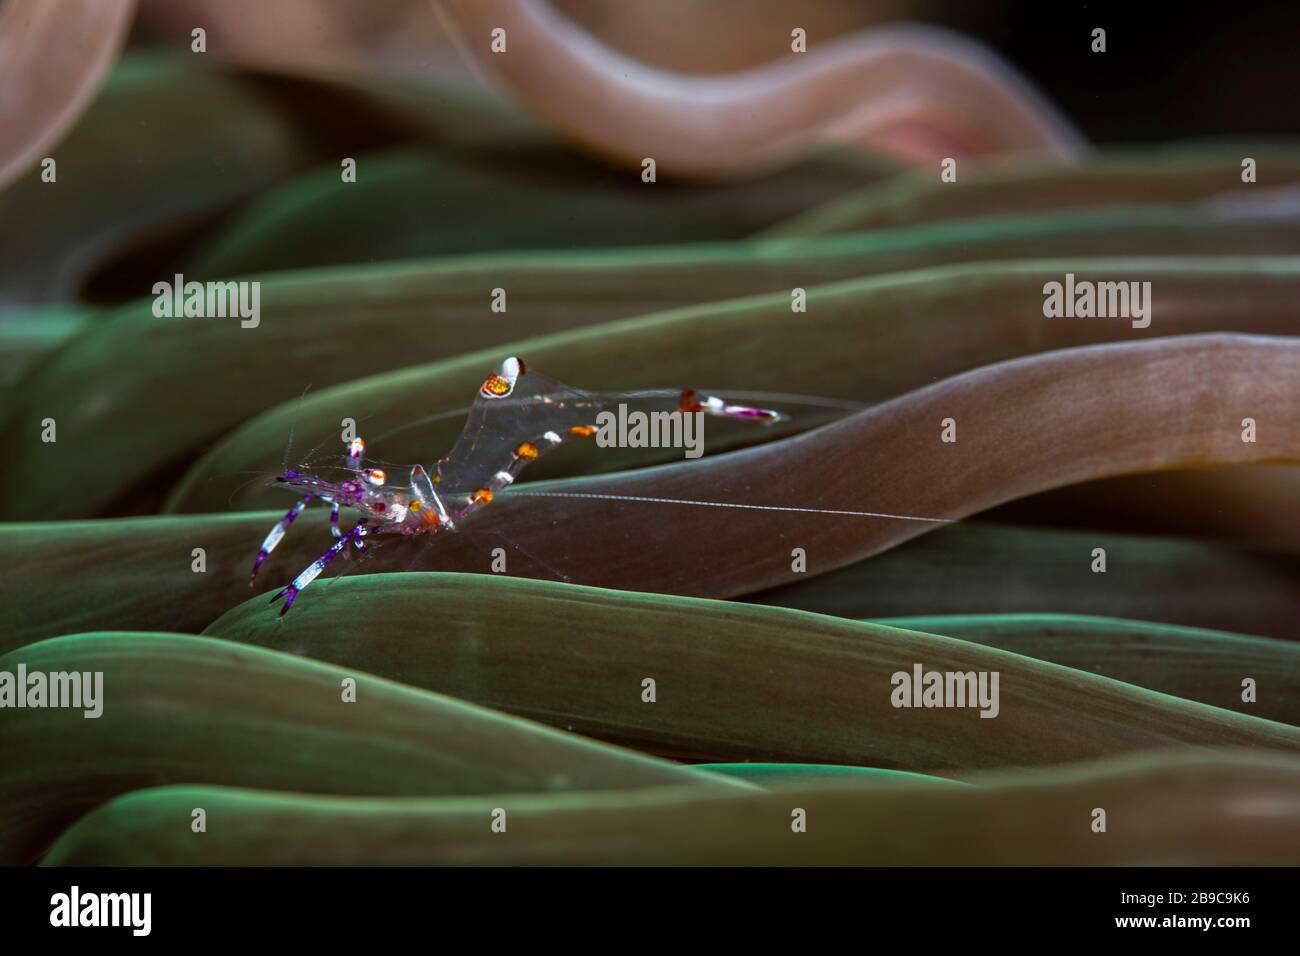 An anemone shrimp lives among the tentacles of an anemone. Stock Photo